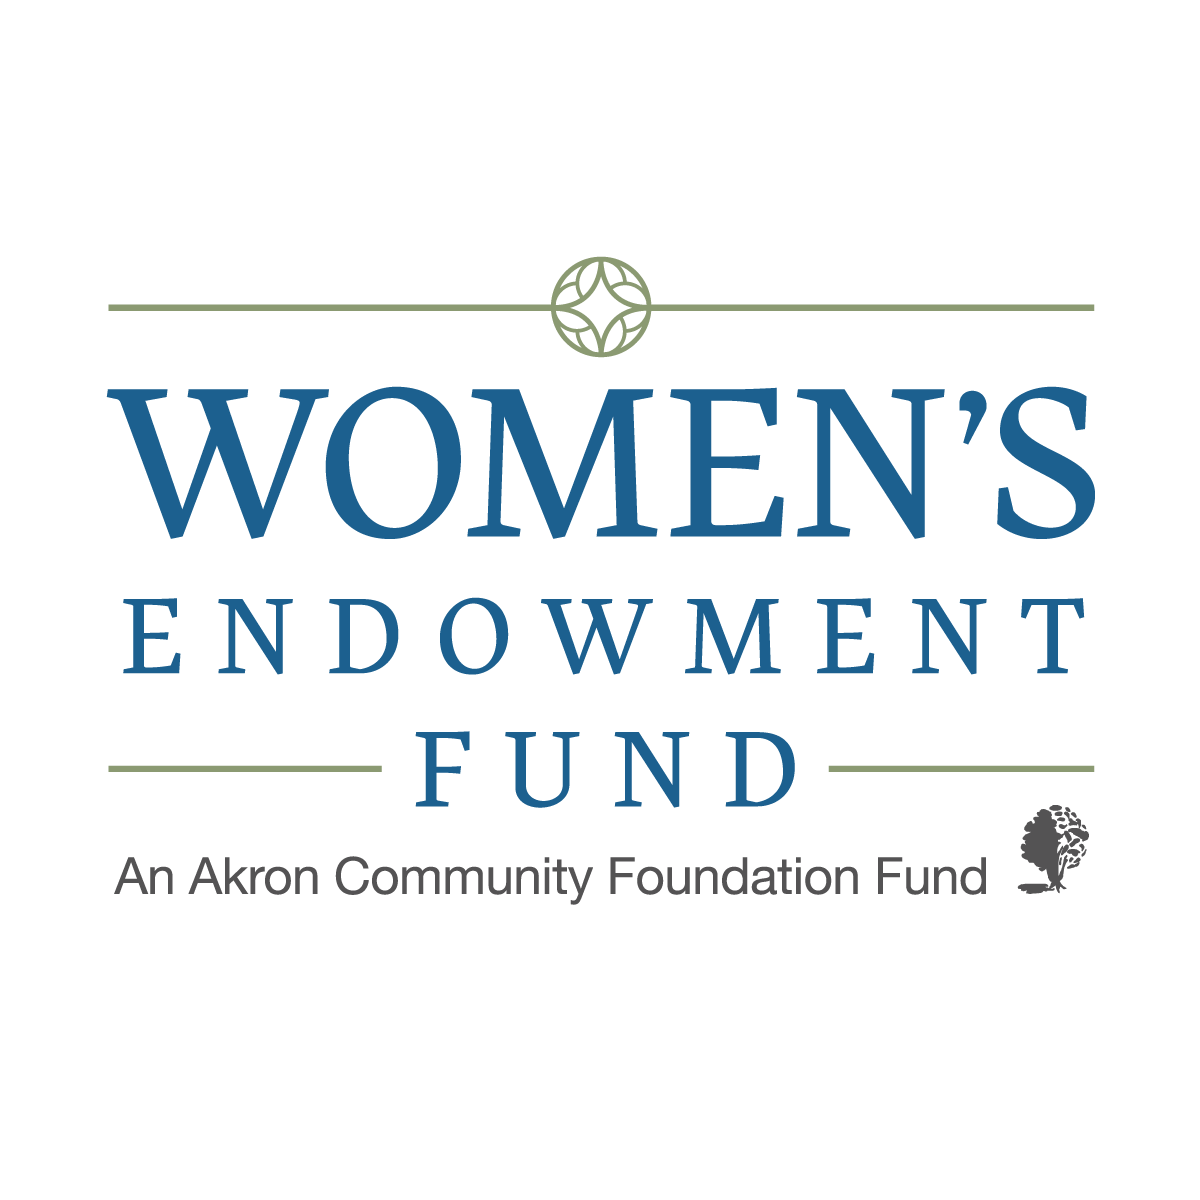 Women’s Endowment Fund announces more than $200K in grants